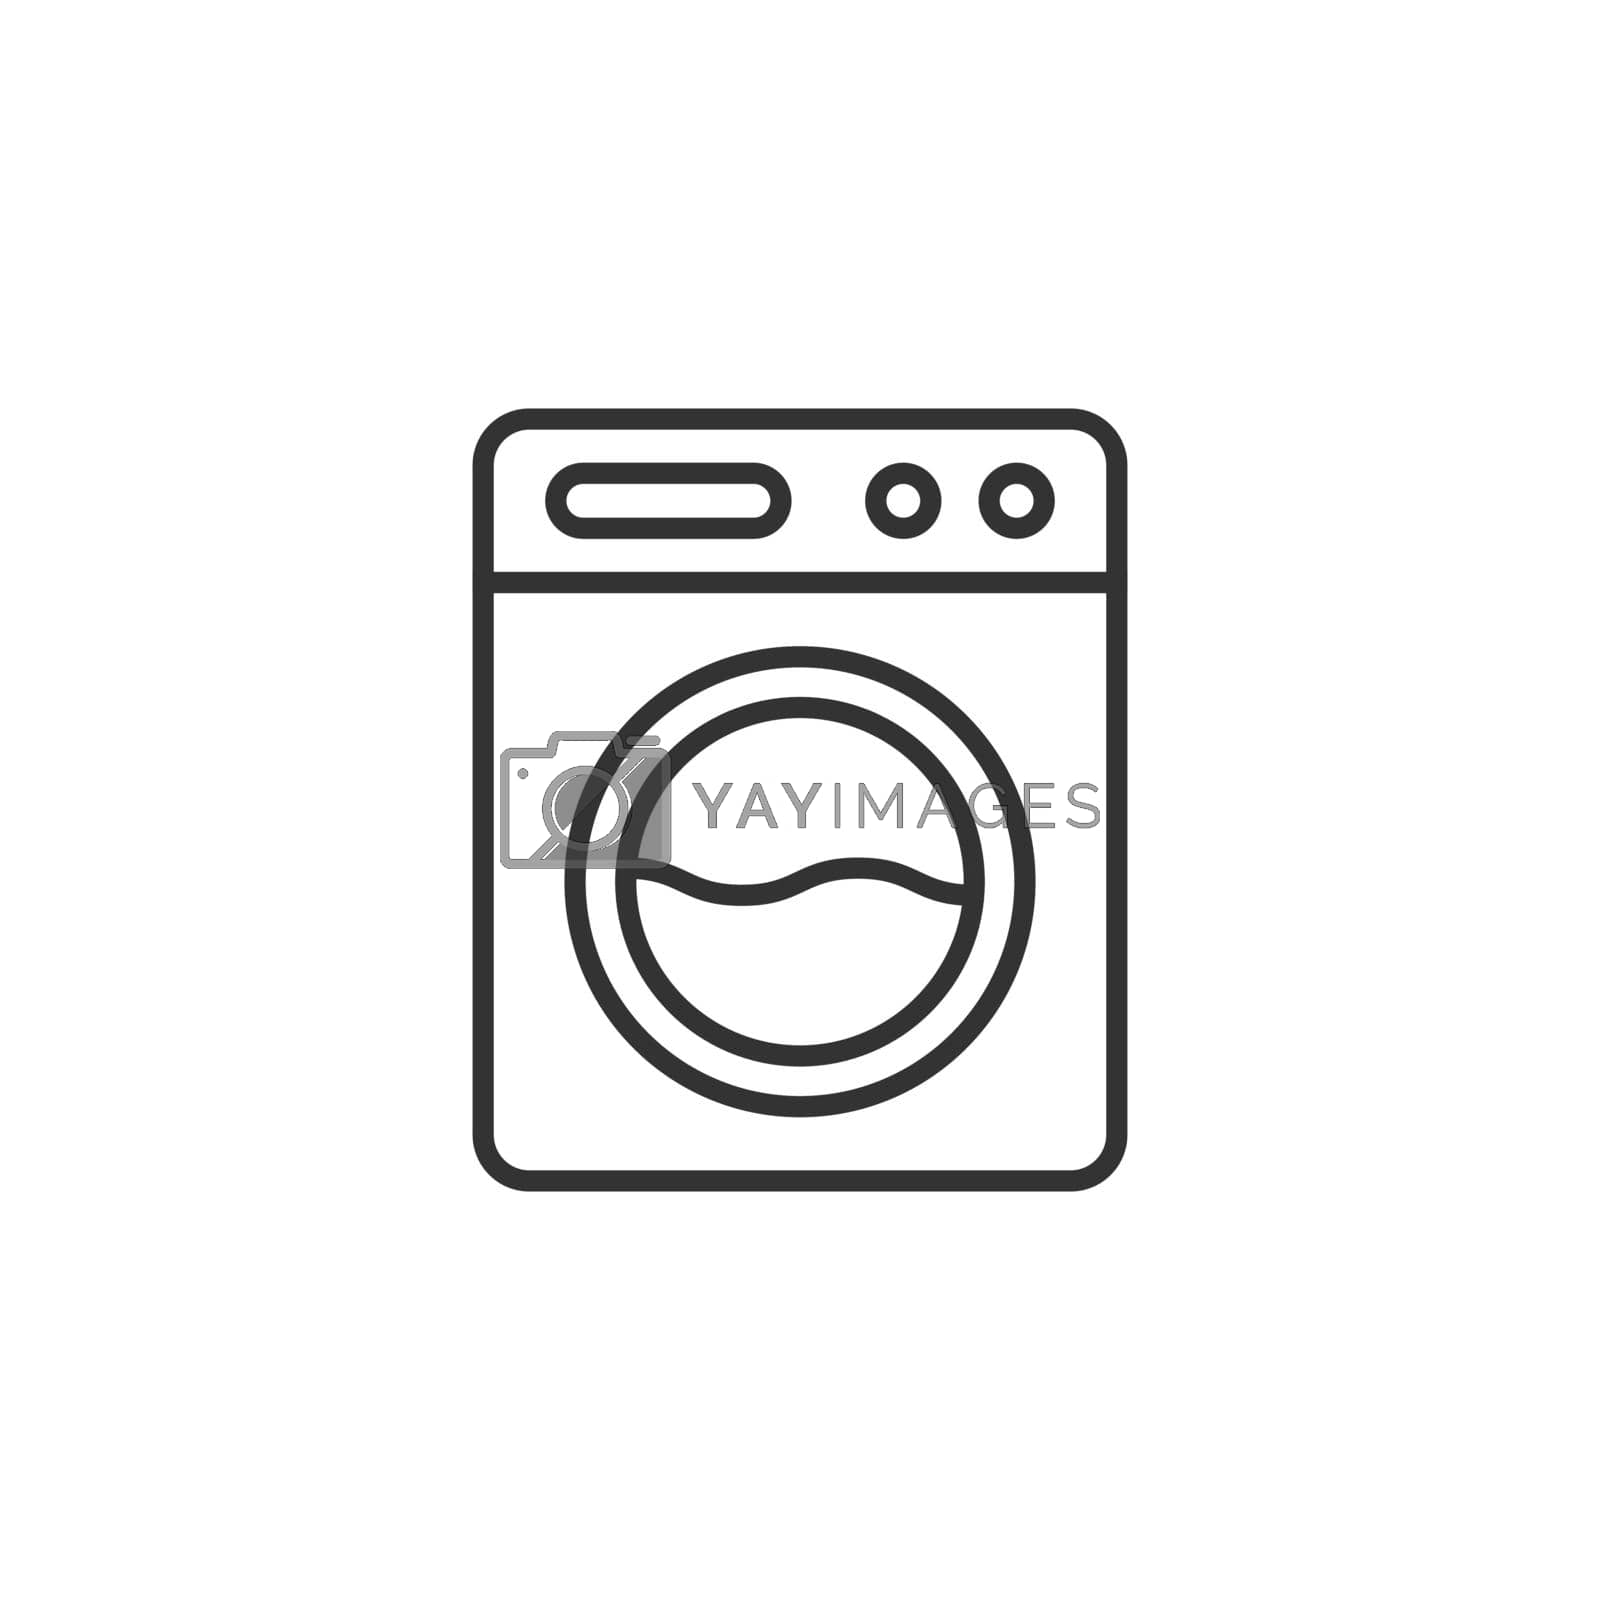 Royalty free image of Washing machine icon in flat style. Washer vector illustration on white isolated background. Laundry business concept. by LysenkoA